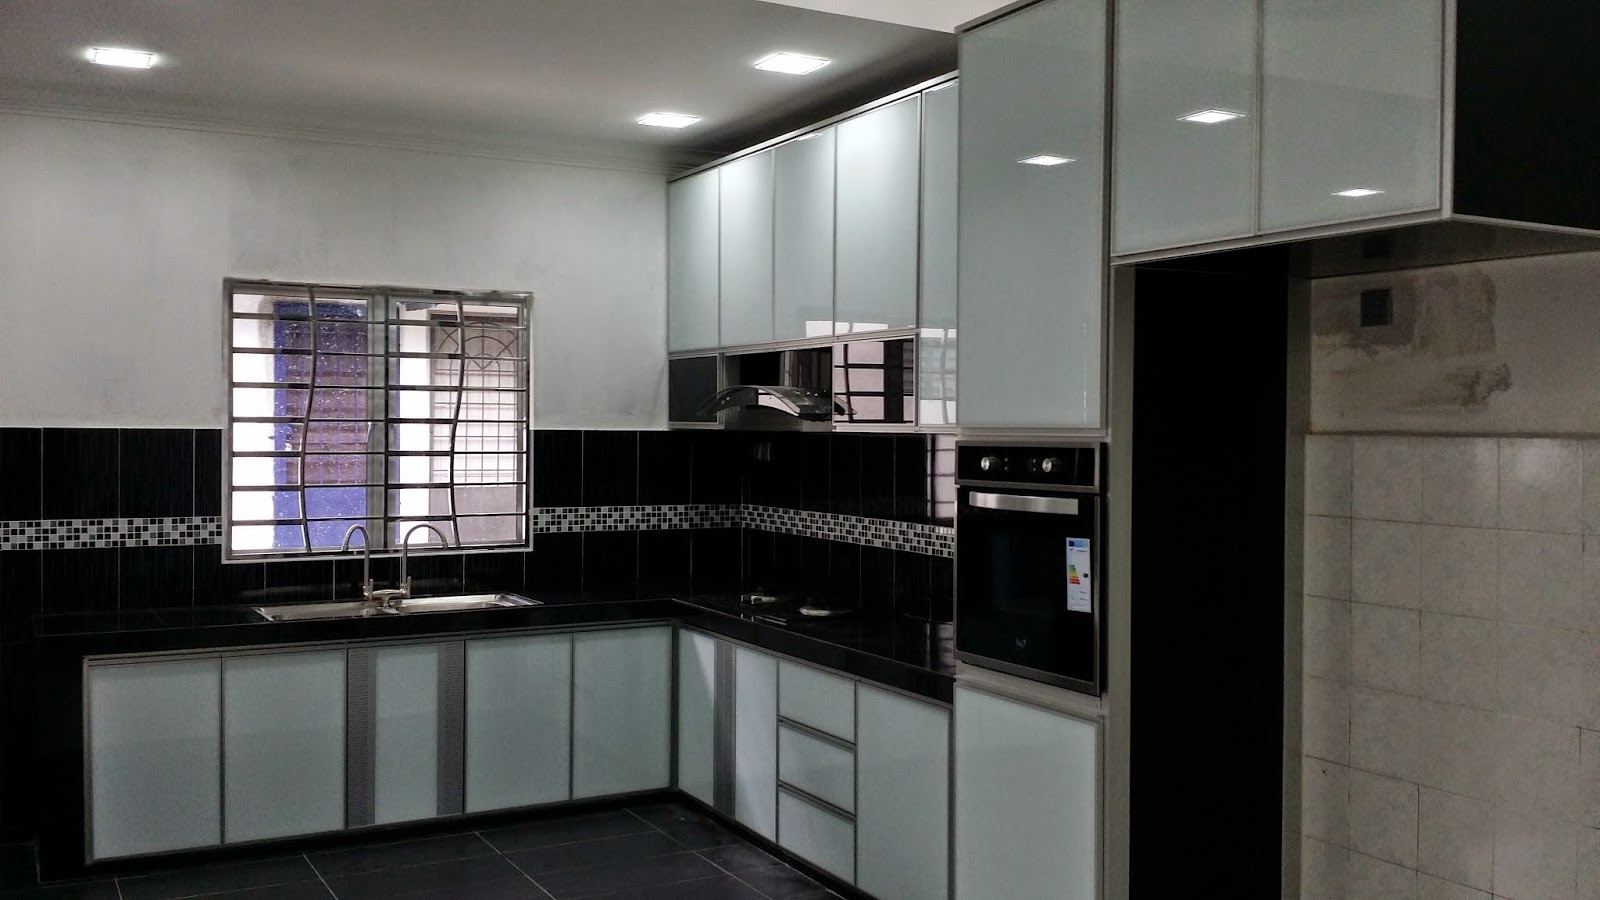 The Journey Of My Life Kitchen Cabinet Kabinet Dapur